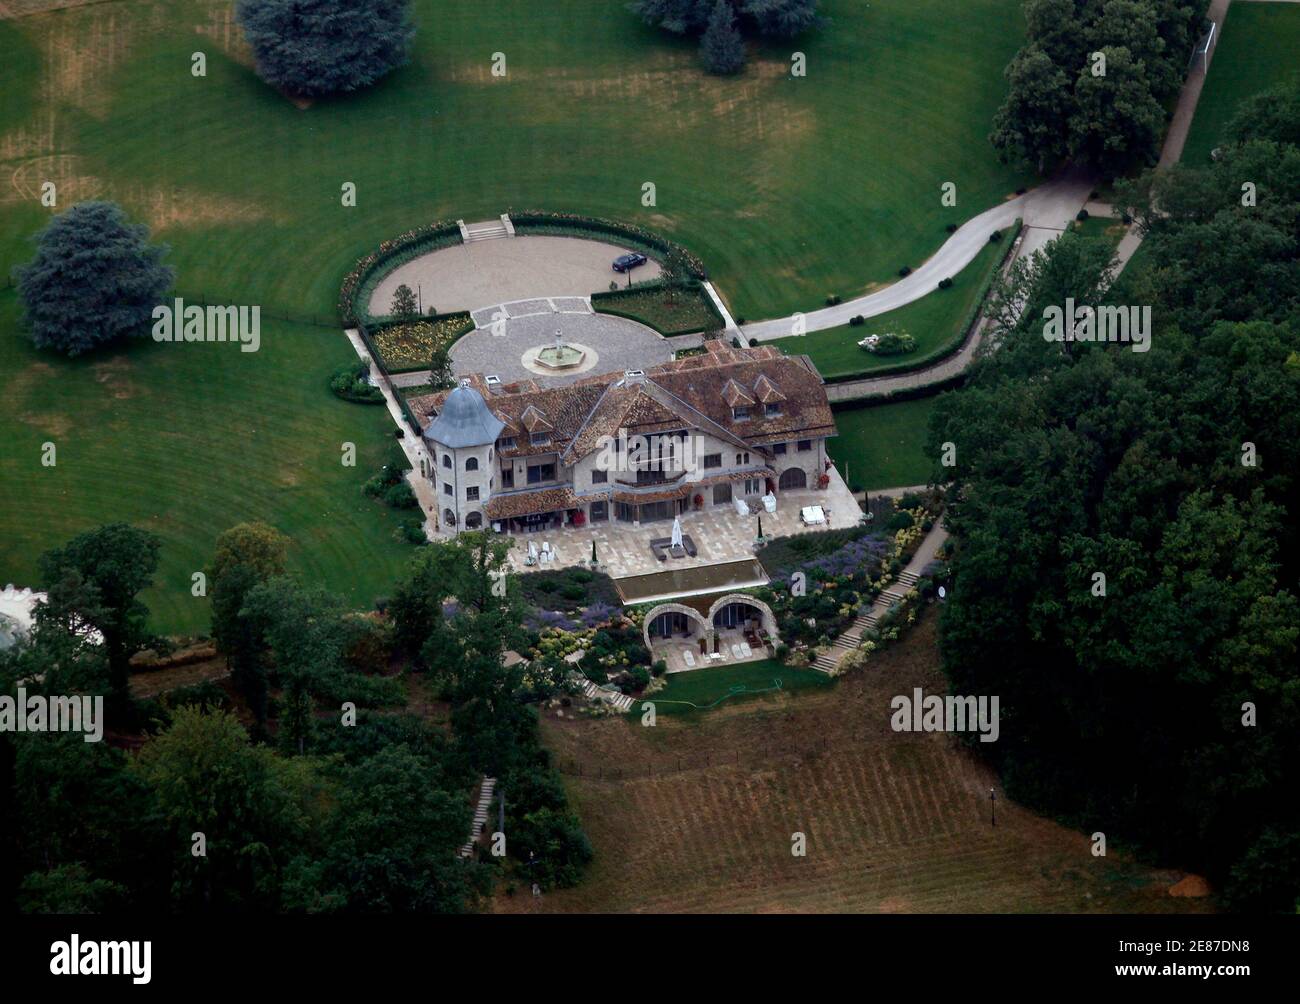 Aeral view of the house of Formula One driver Michael Schumacher by Lake  Leman in Gland near Nyon July 22, 2010. REUTERS/Denis Balibouse (SWITZERLAND  Stock Photo - Alamy